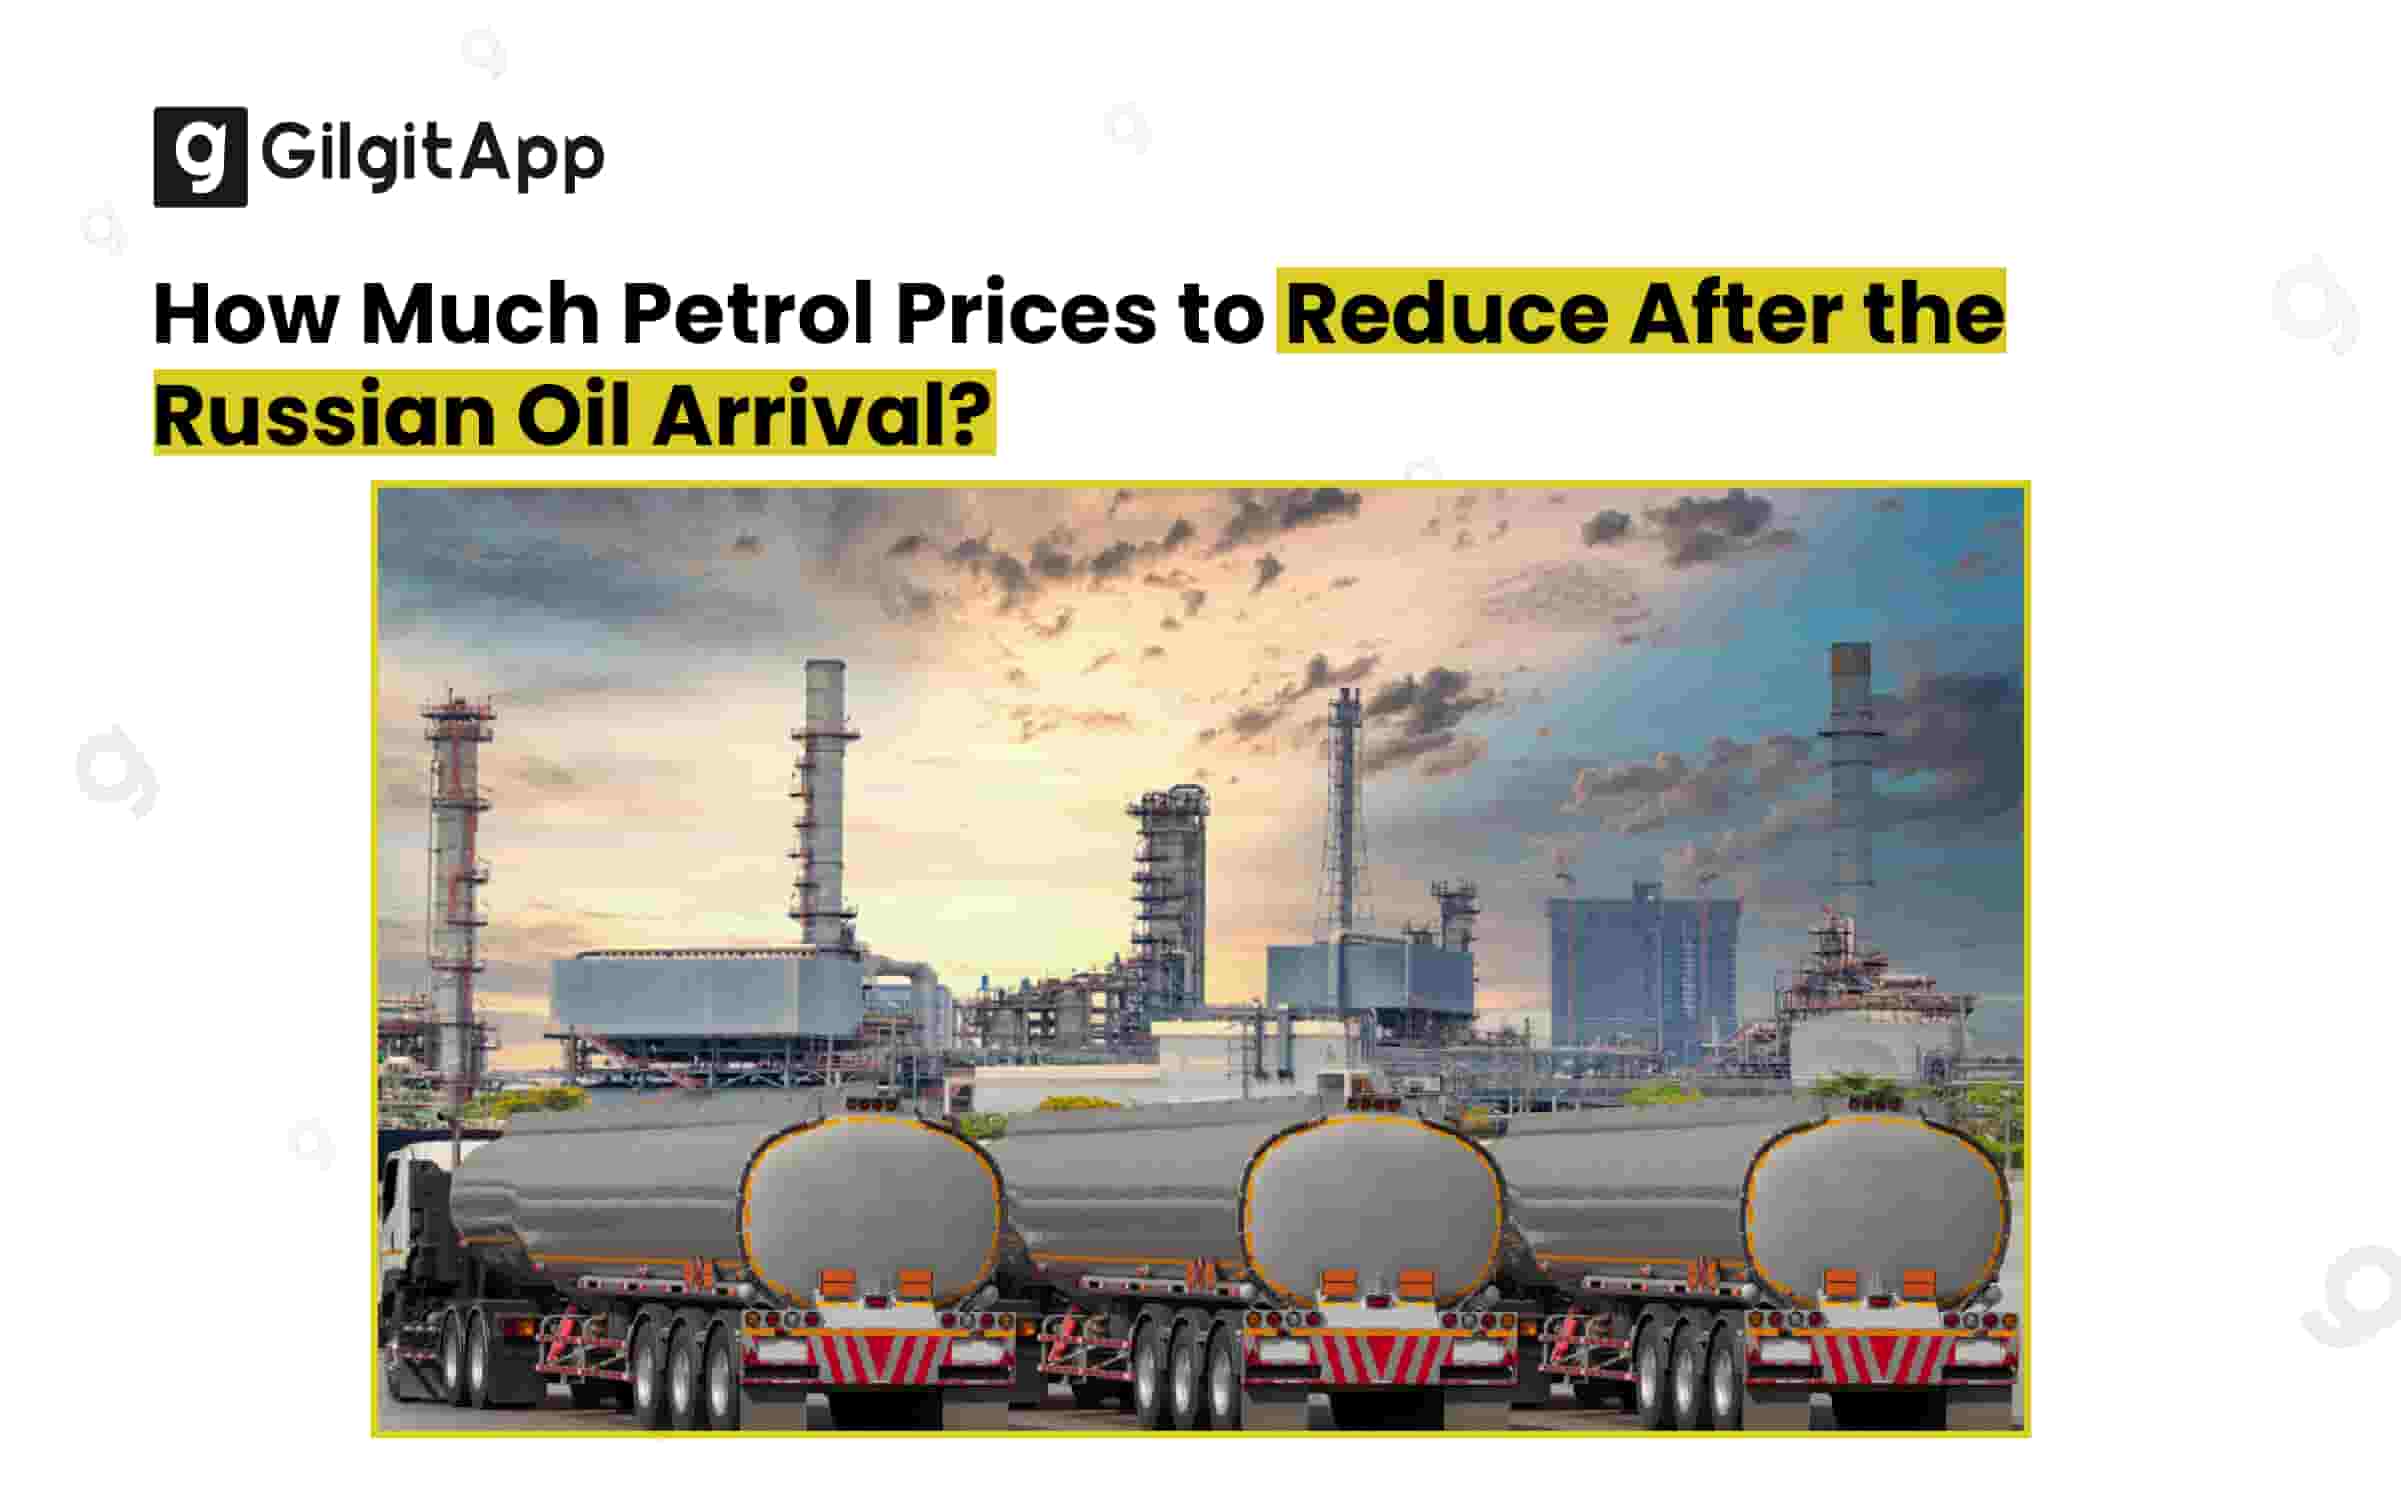 How Much Petrol Prices to Reduce After the Russian Oil Arrival?